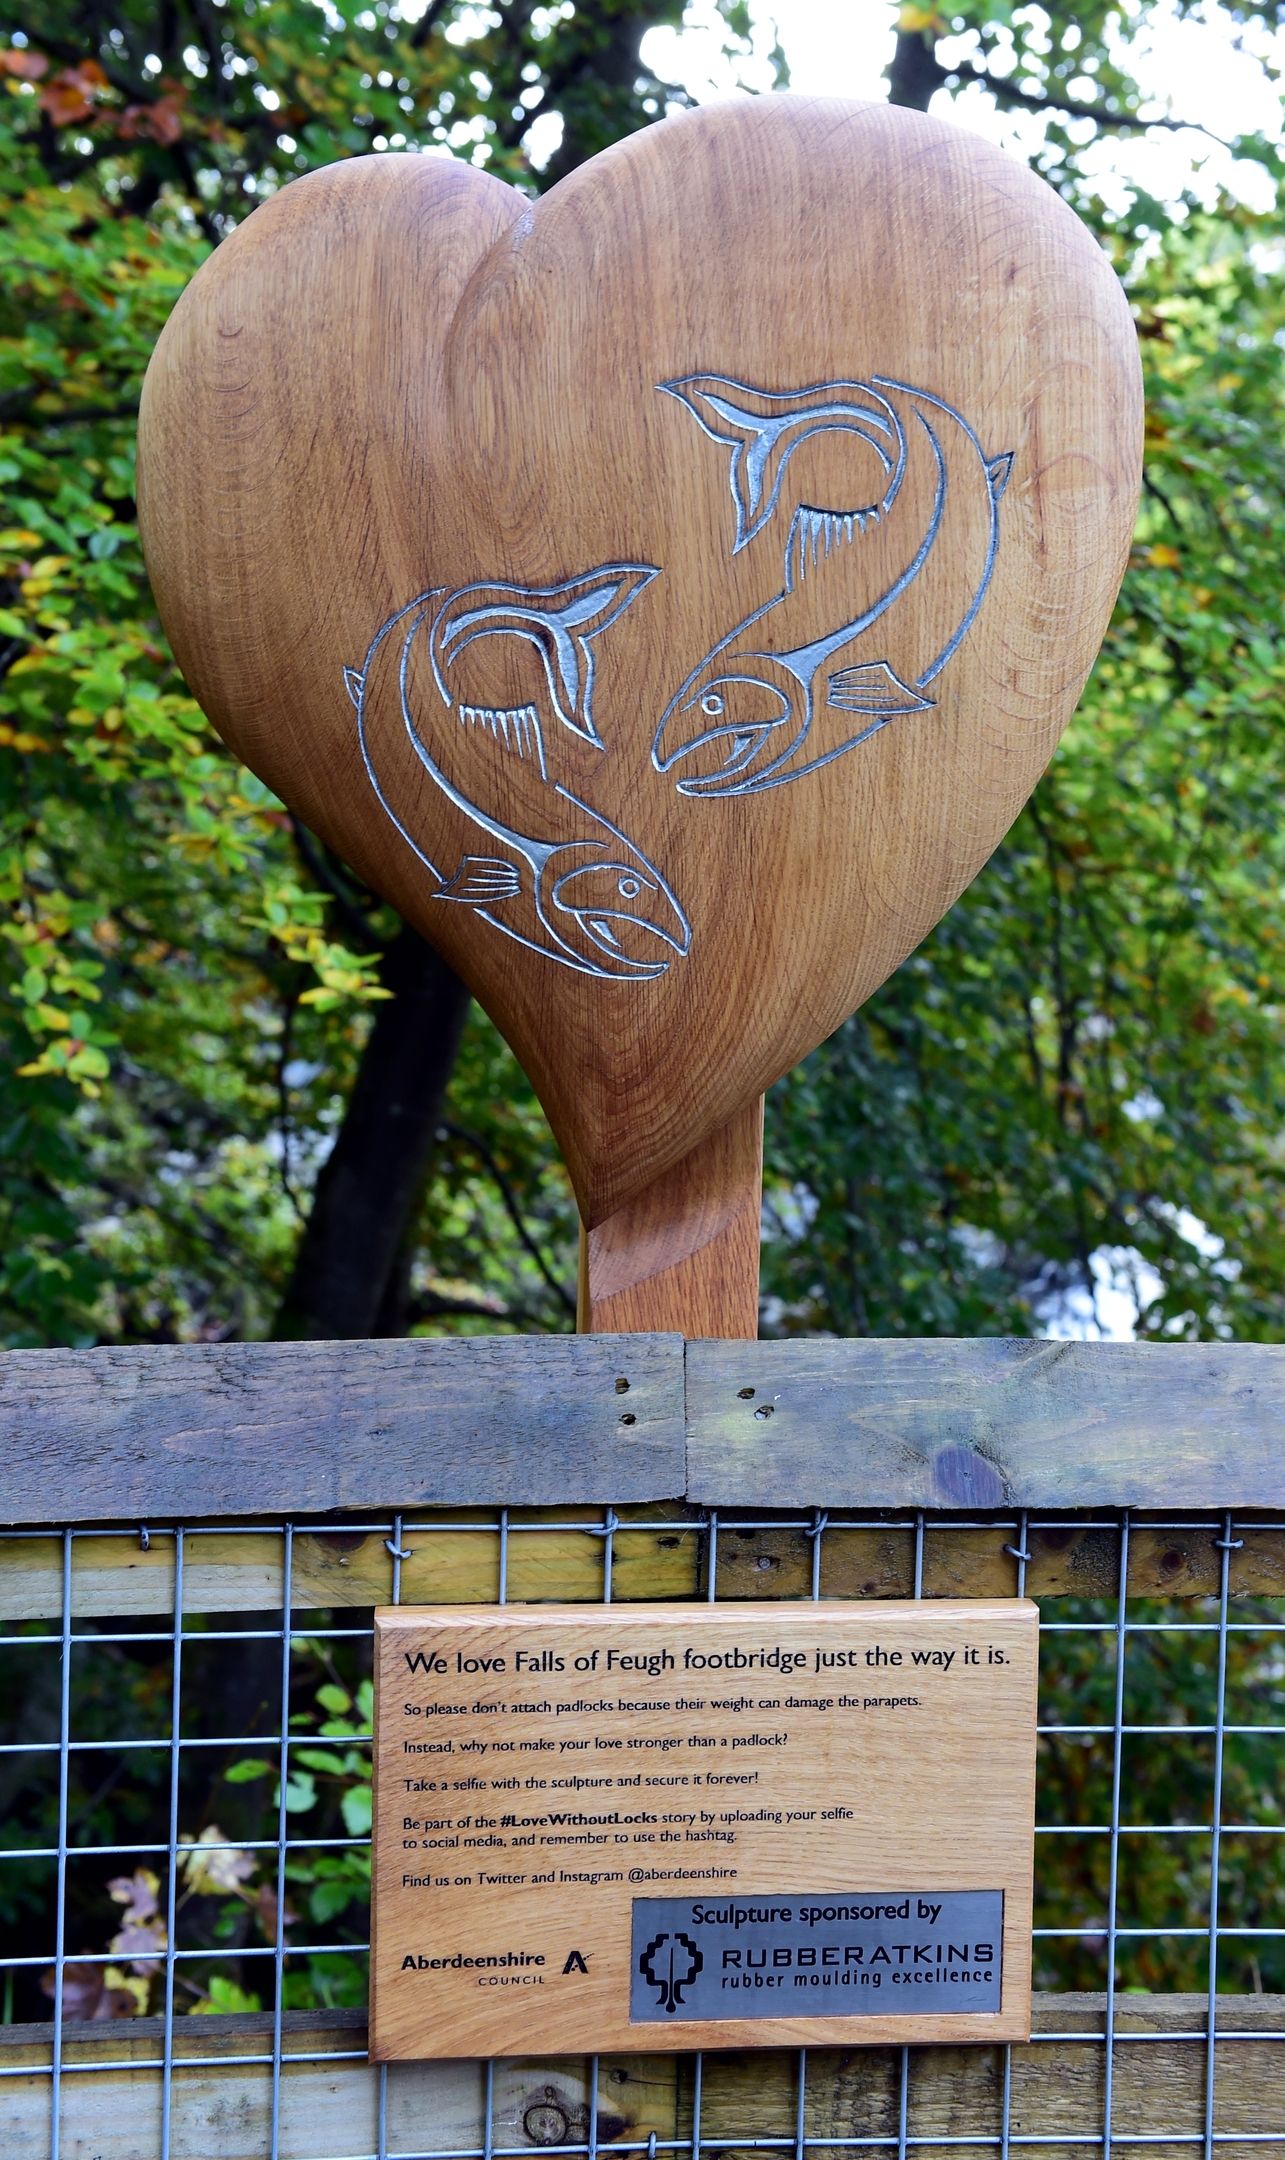 The wooden heart for #lovewithoutlocks